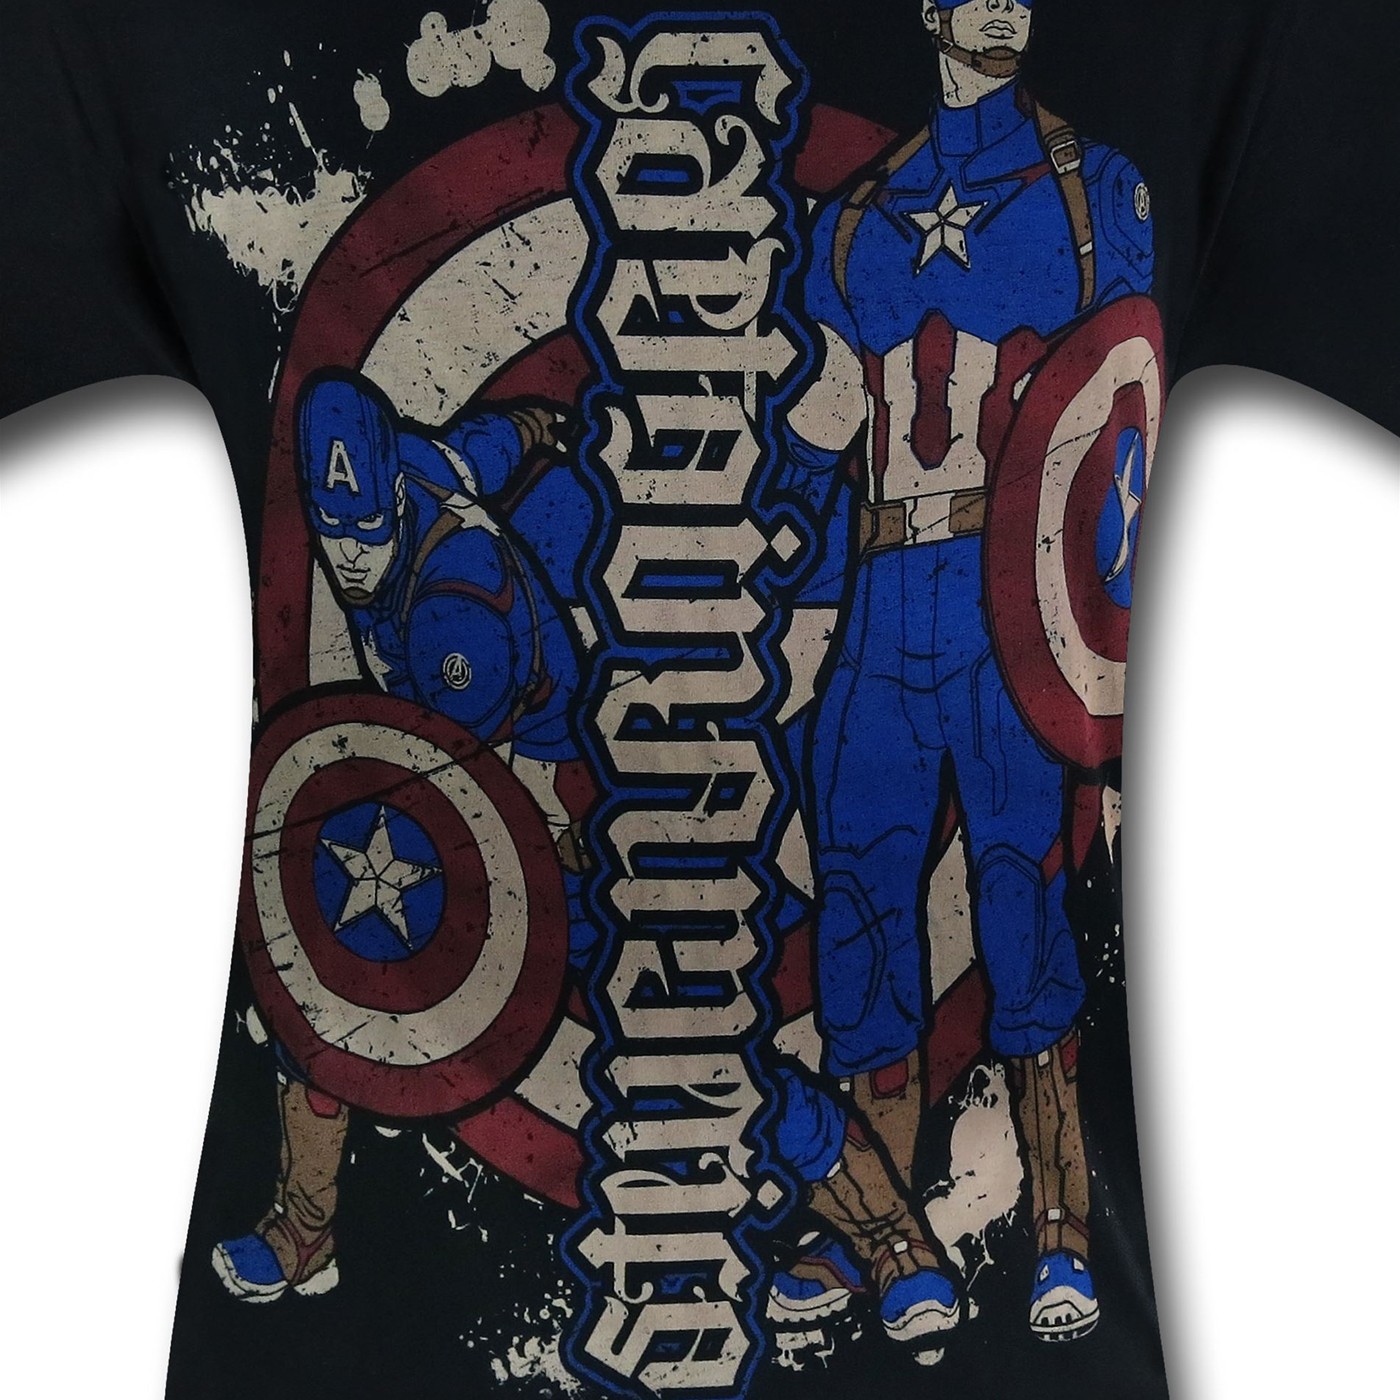 Captain America AoU Red Chapter Ambigram T-Shirt